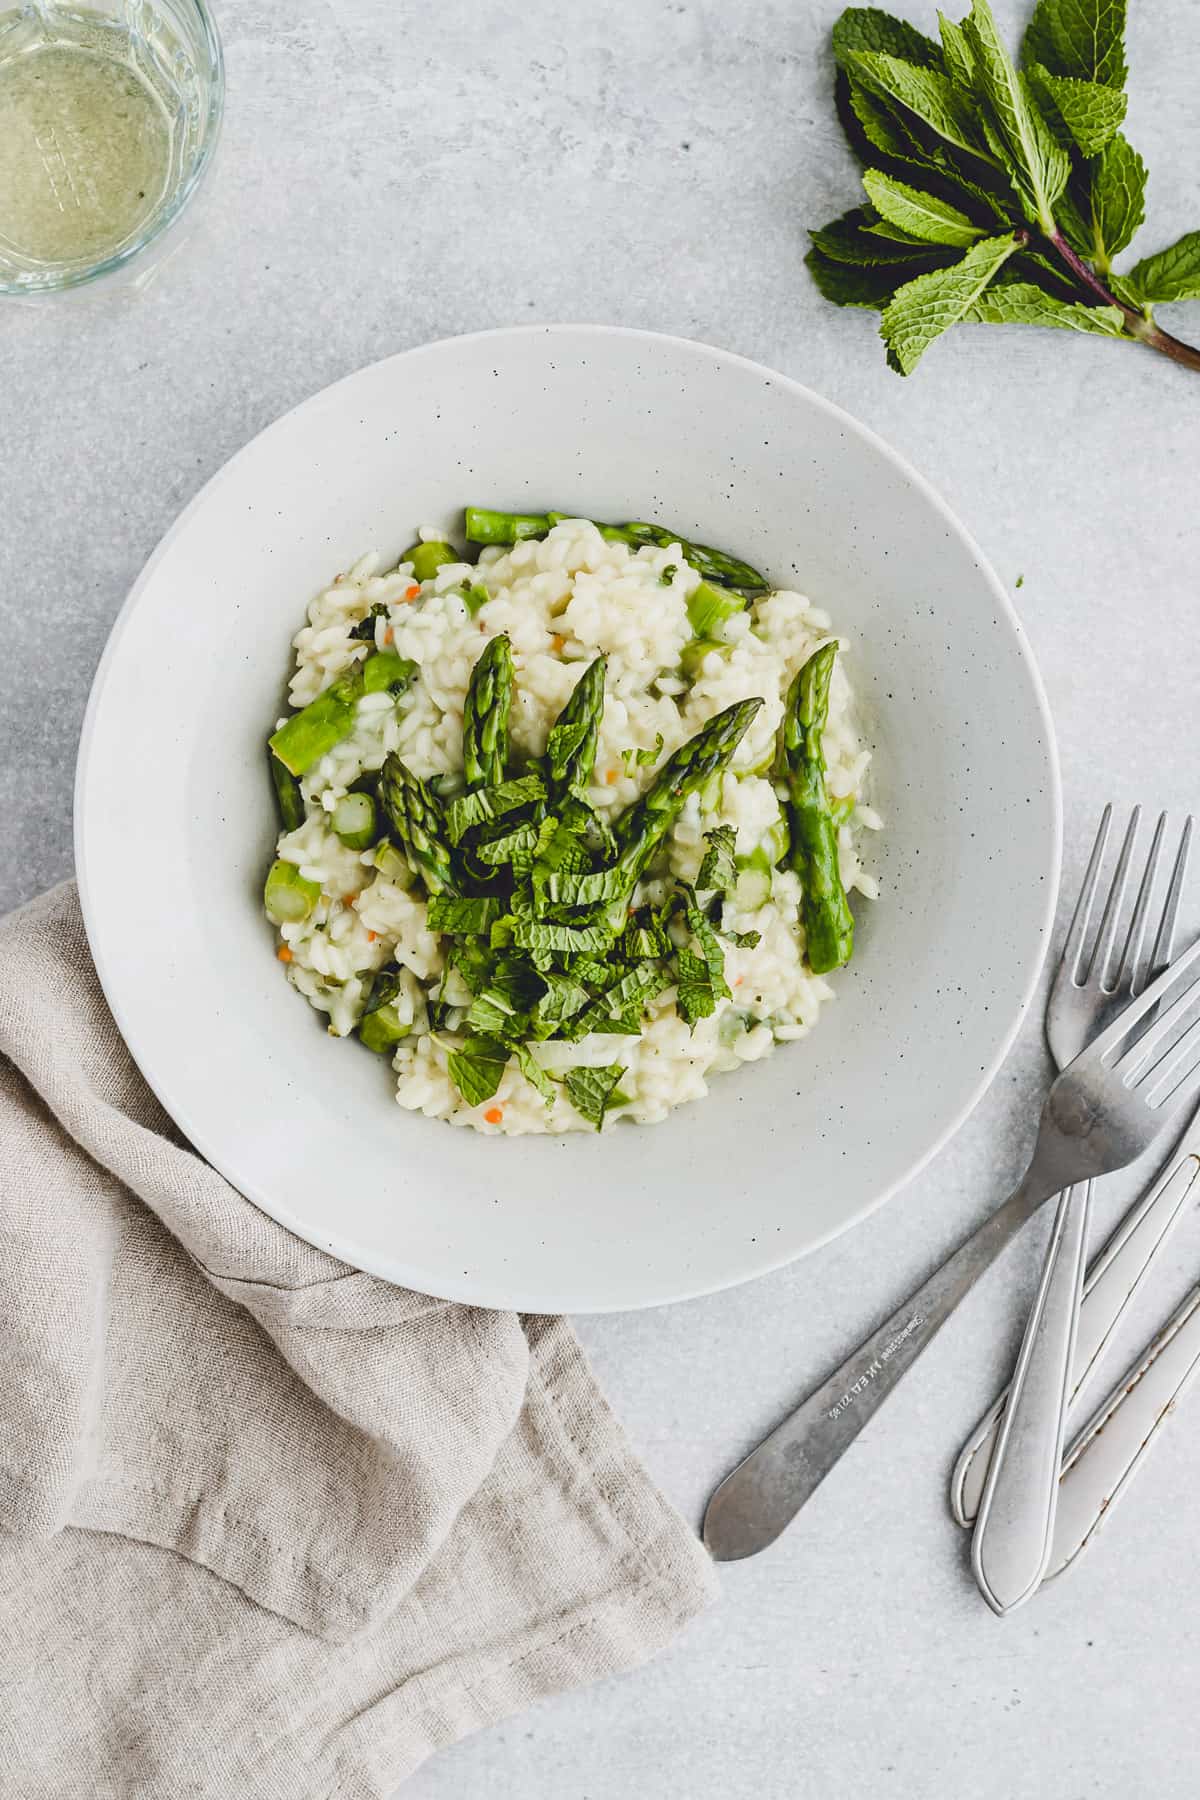 asparagus risotto with mint and lemon next to a glass of wine